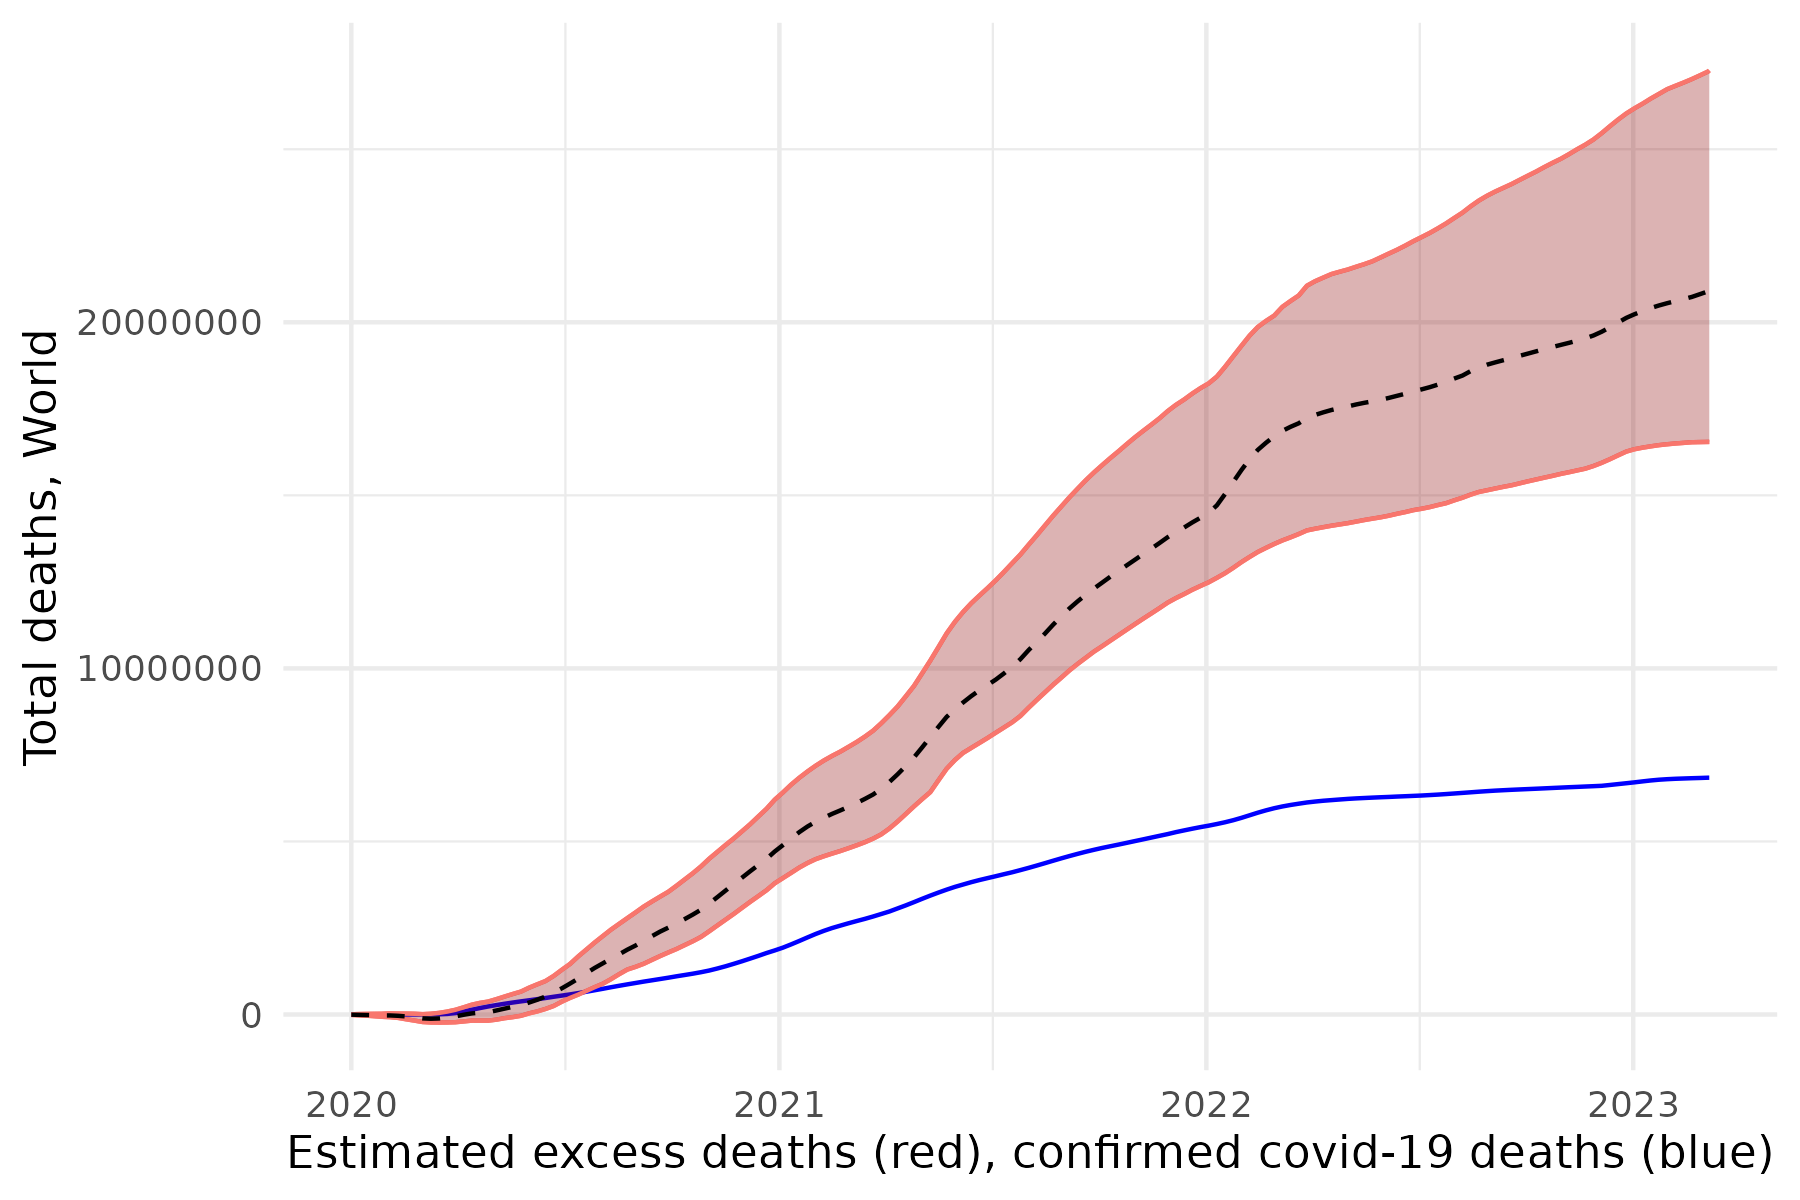 Chart of total deaths over time